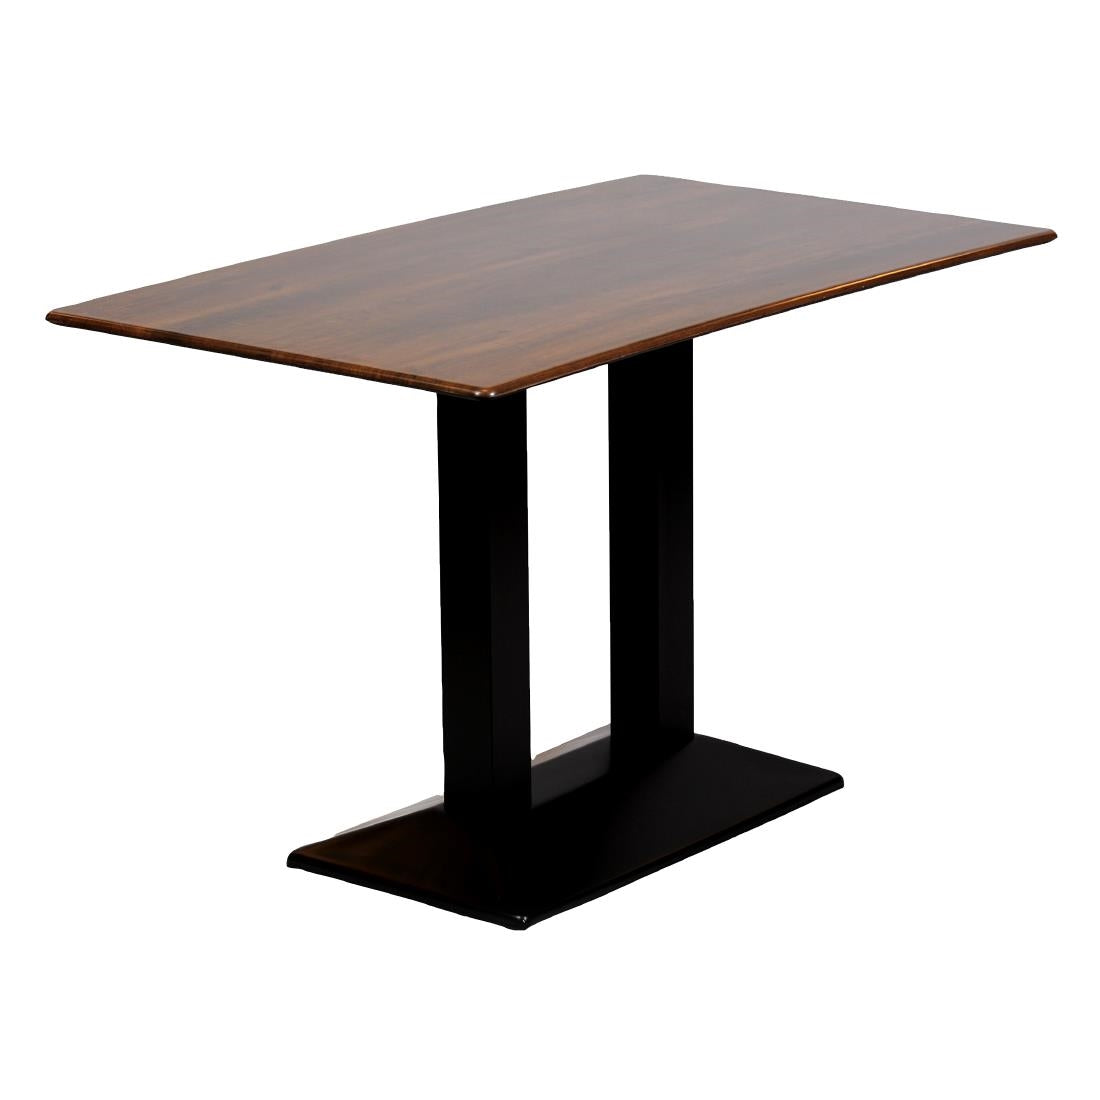 CZ825 Turin Metal Base Rectangular Dining Table with Laminate Top Walnut 1200x700mm JD Catering Equipment Solutions Ltd